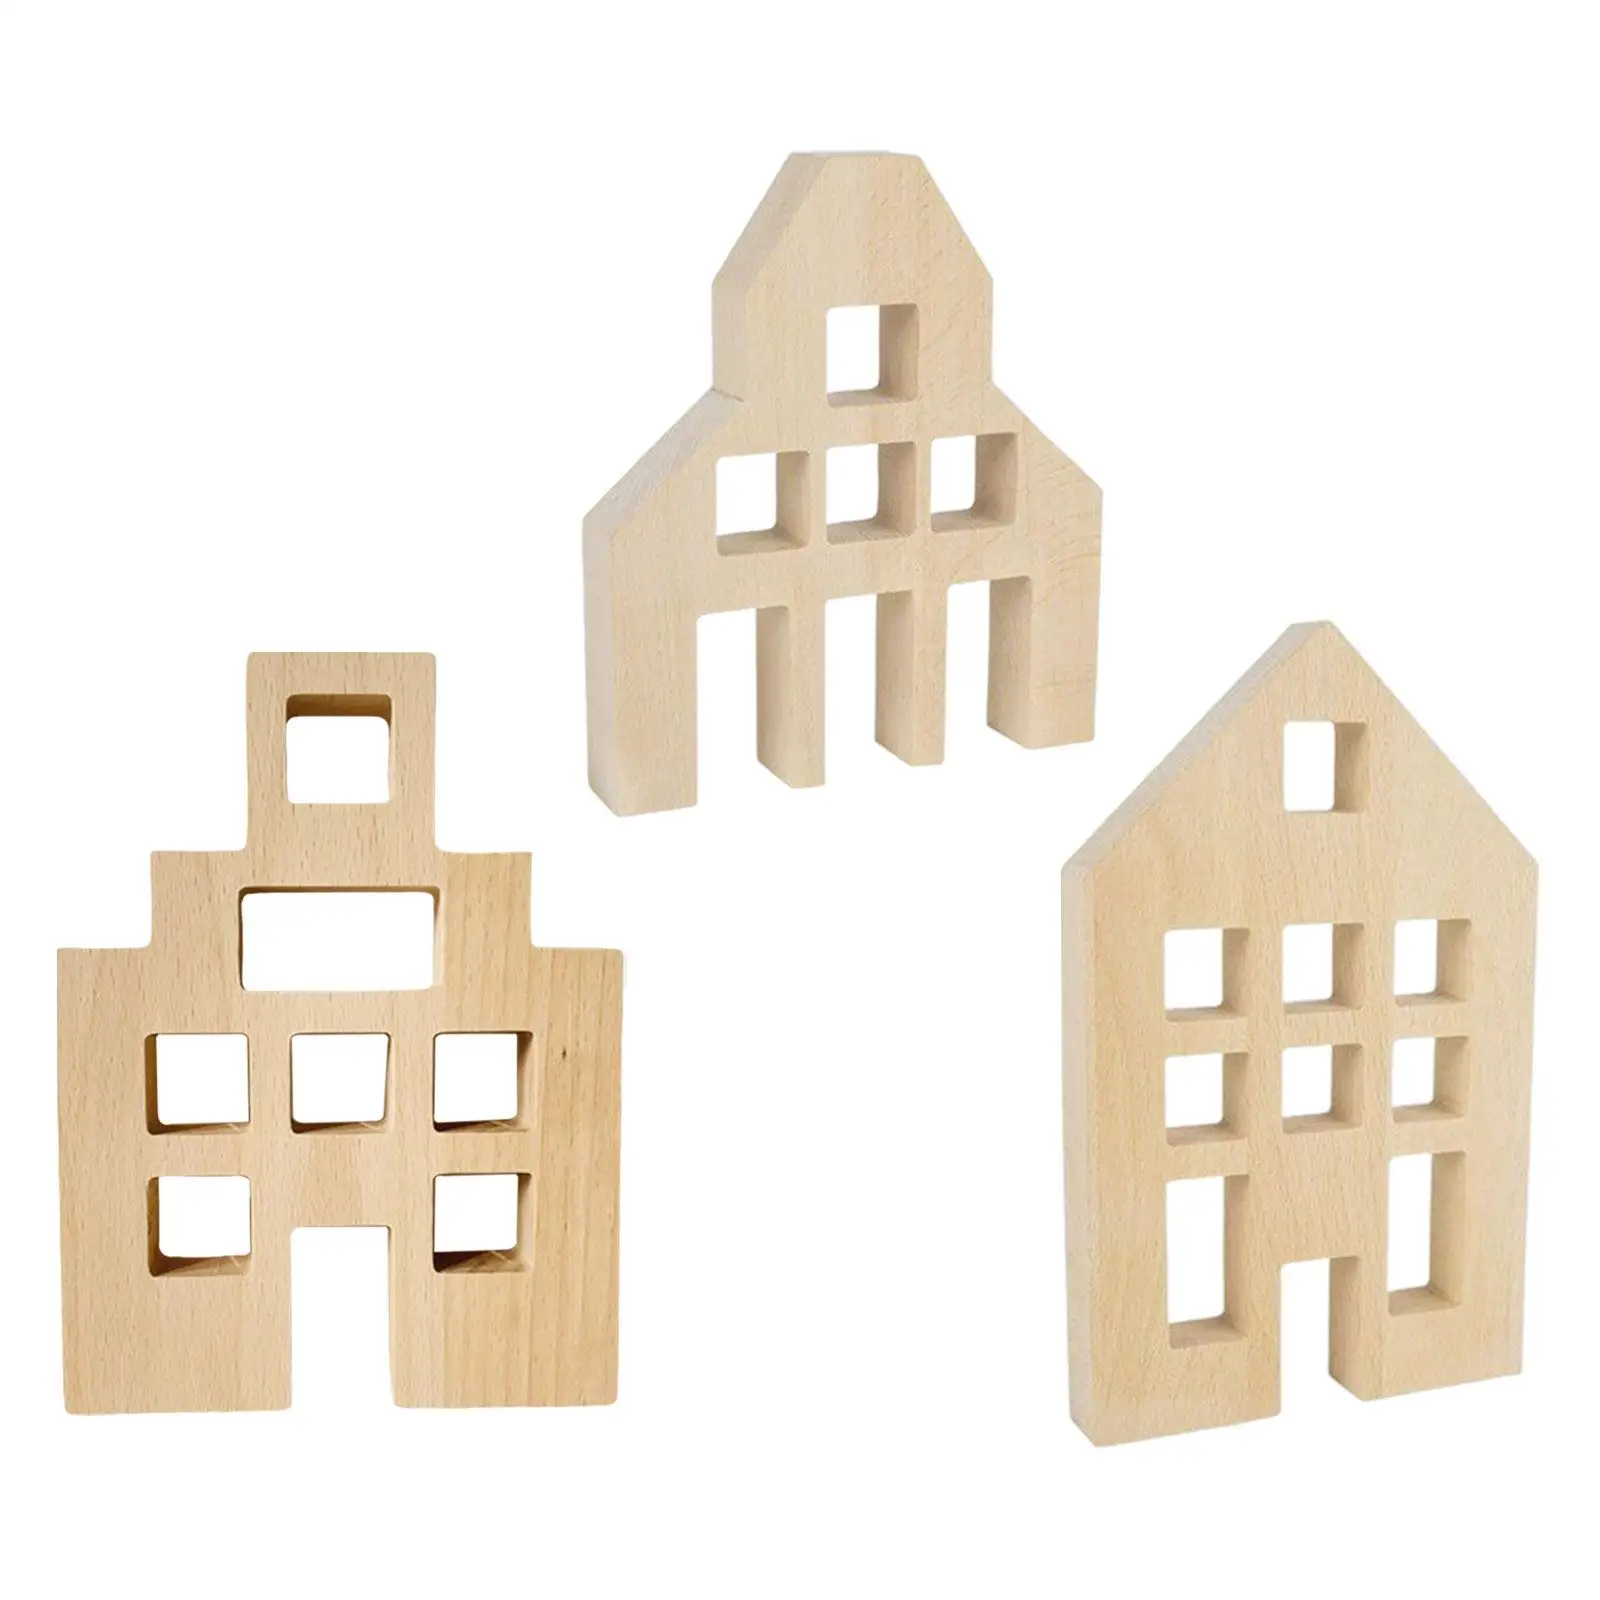 3x Wood House Blocks Wood Marble Track Maze Game Early Educational Centerpiece for Party Favors Ages 4 to 8 Kids Boys girls